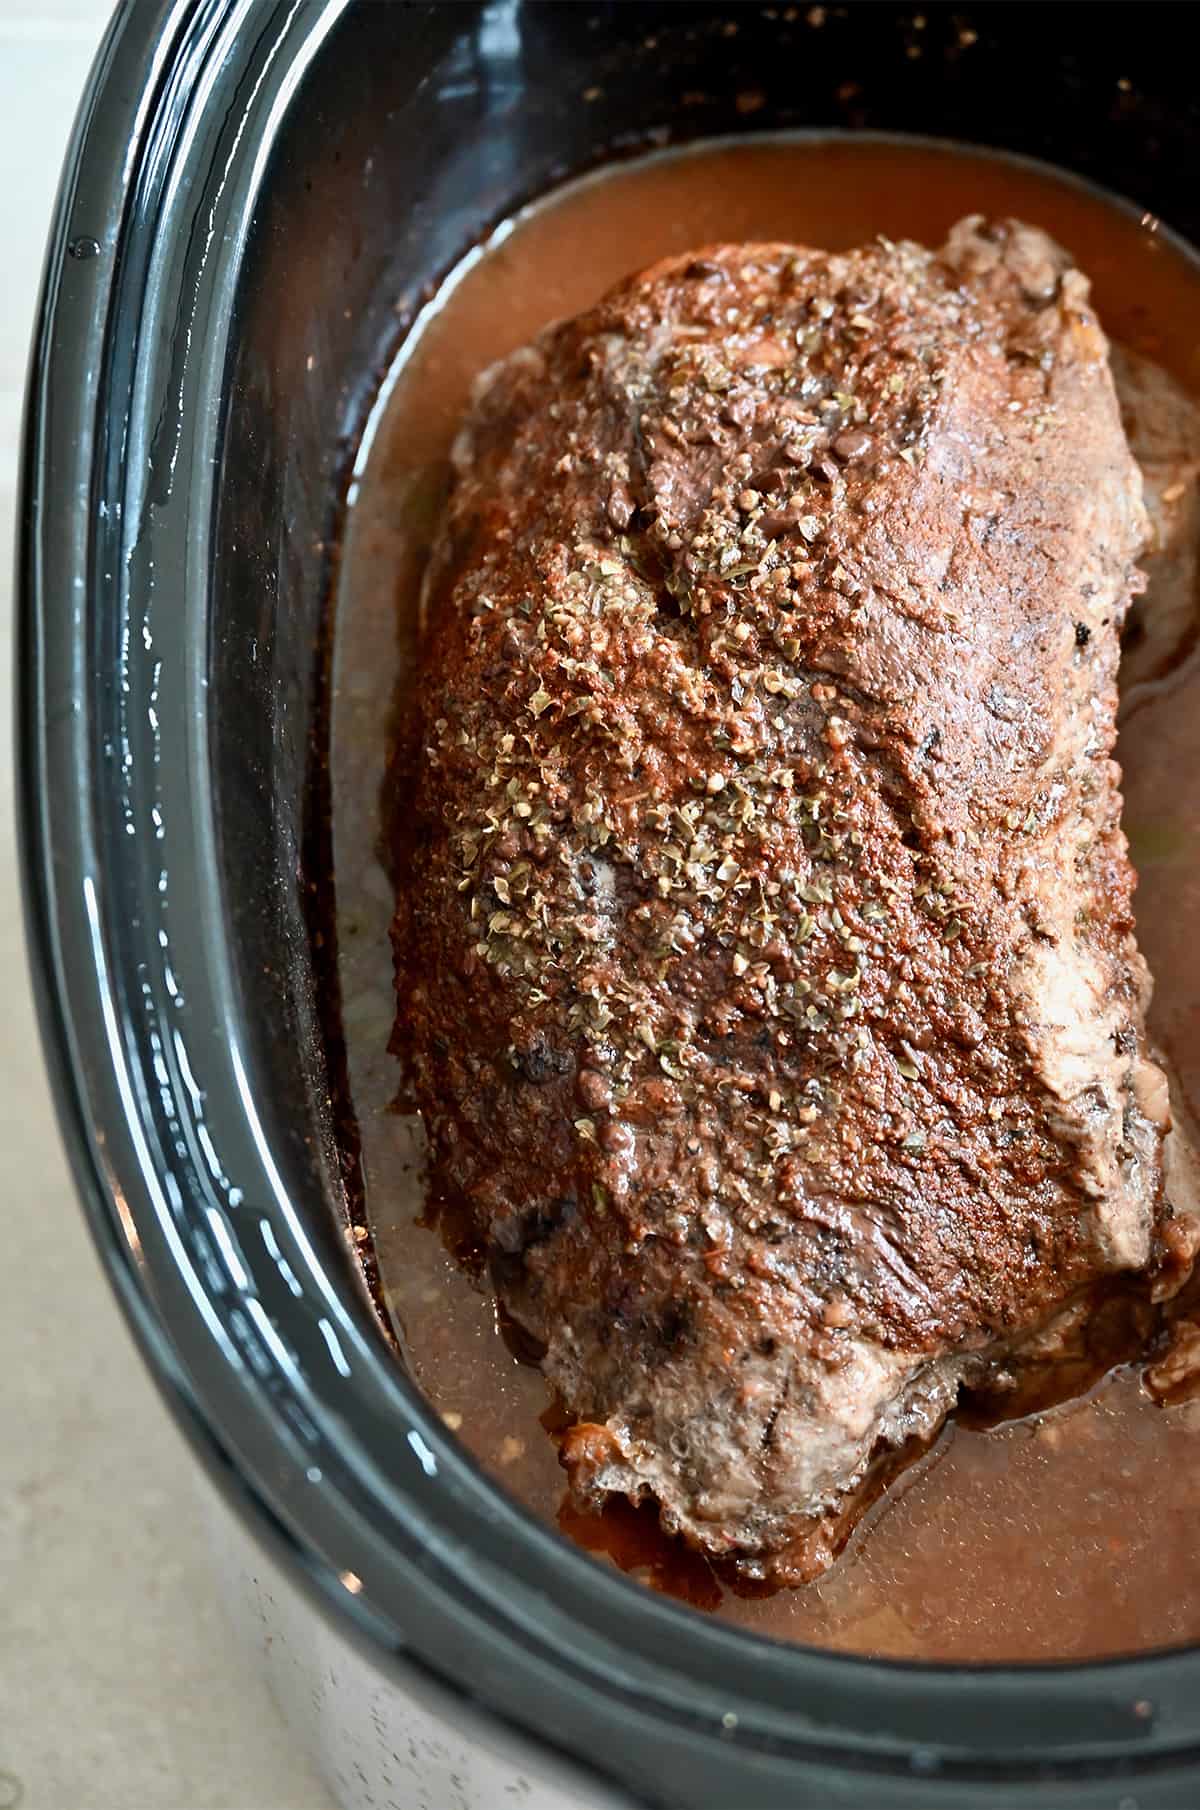 A whole, cooked pork roast in the bowl of a slow cooker.